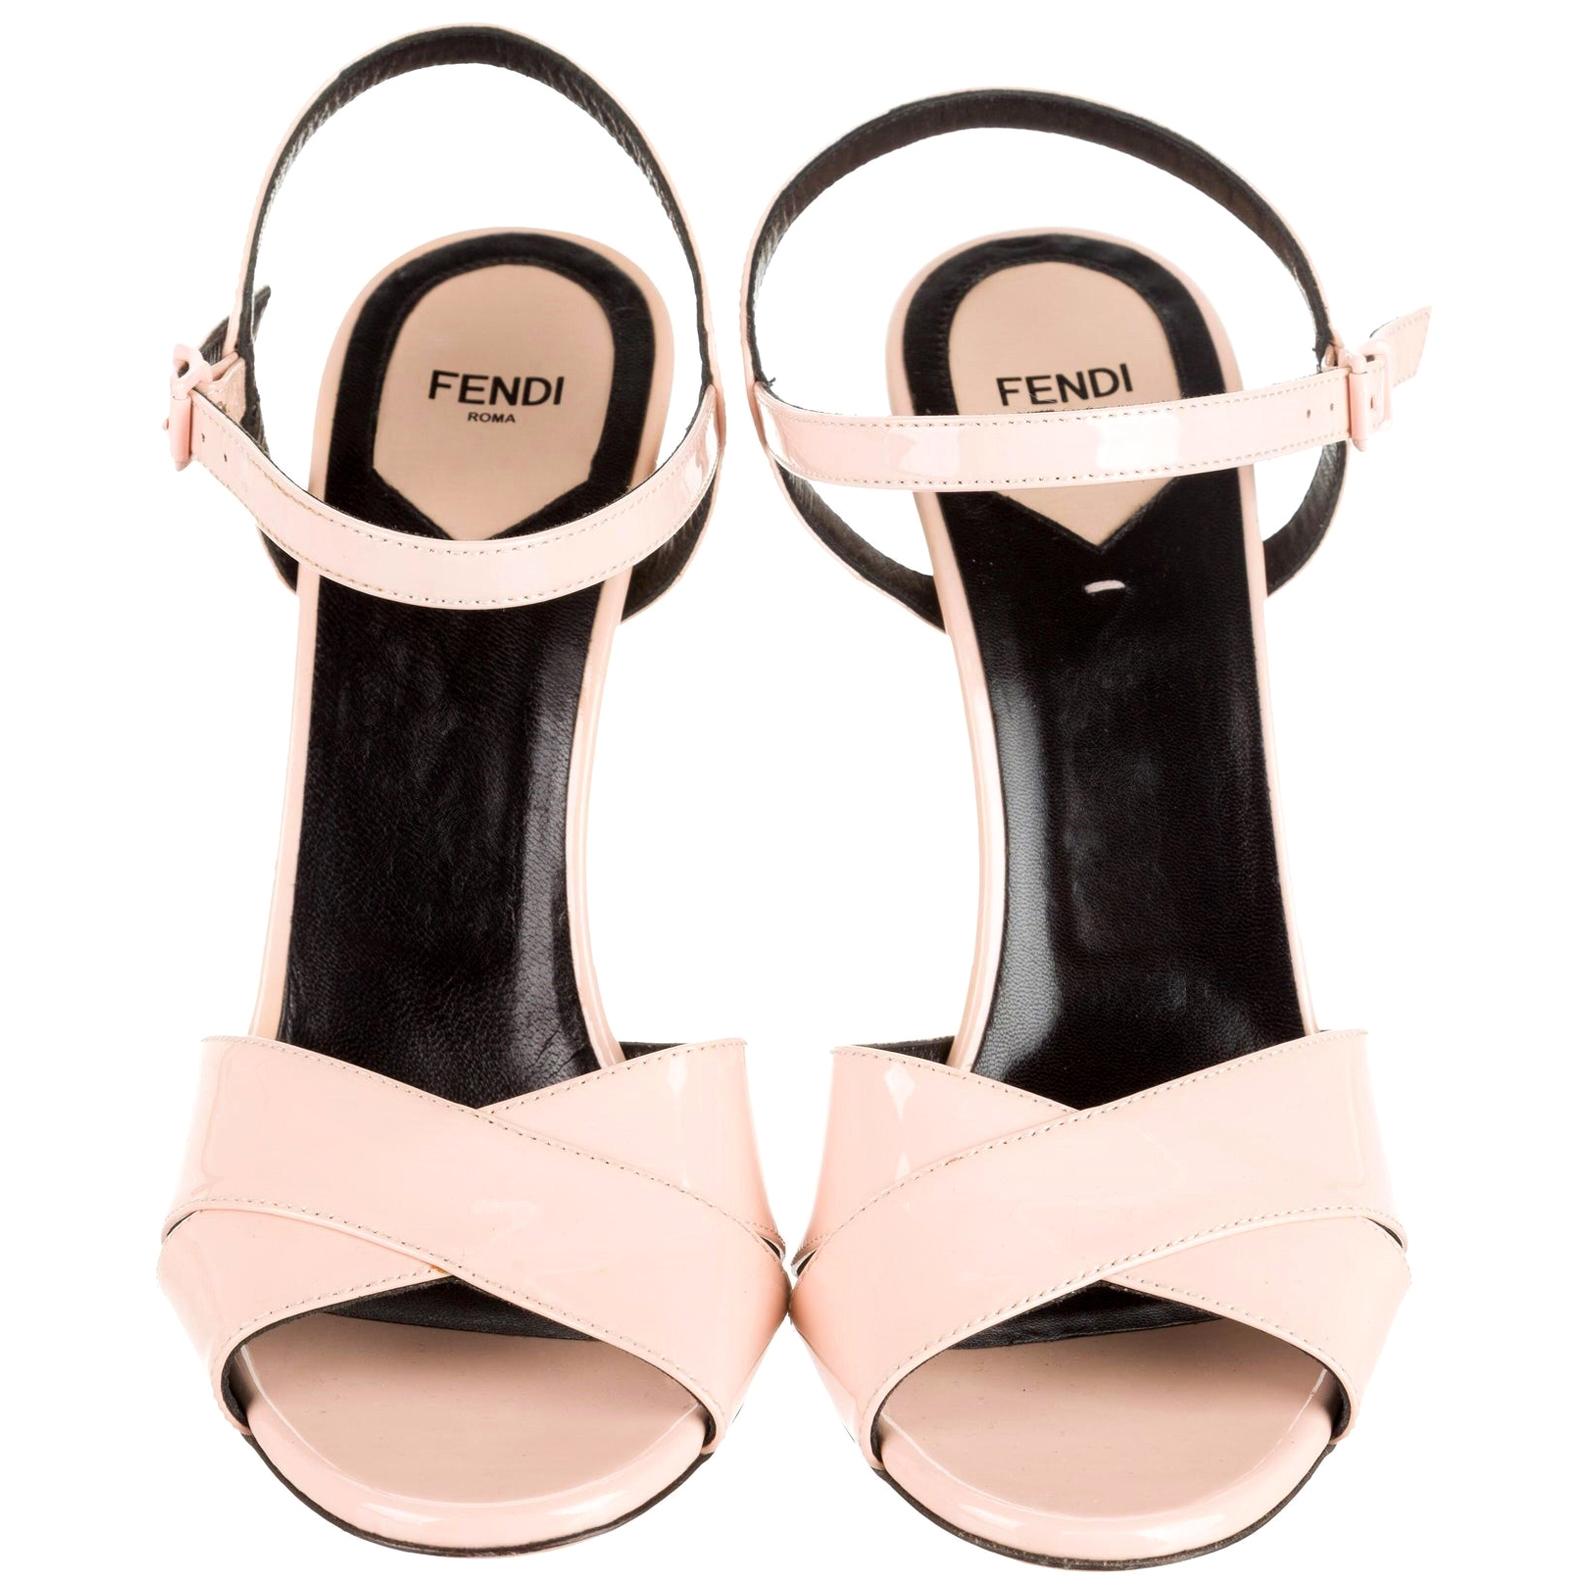 Karl Lagerfeld for Fendi 
Brand New with Box & Extra Heel Tips
Leather Metal Heels
Runway Spring 2014
Stunning Milky Pale Blush Pink
Heels: 4.75